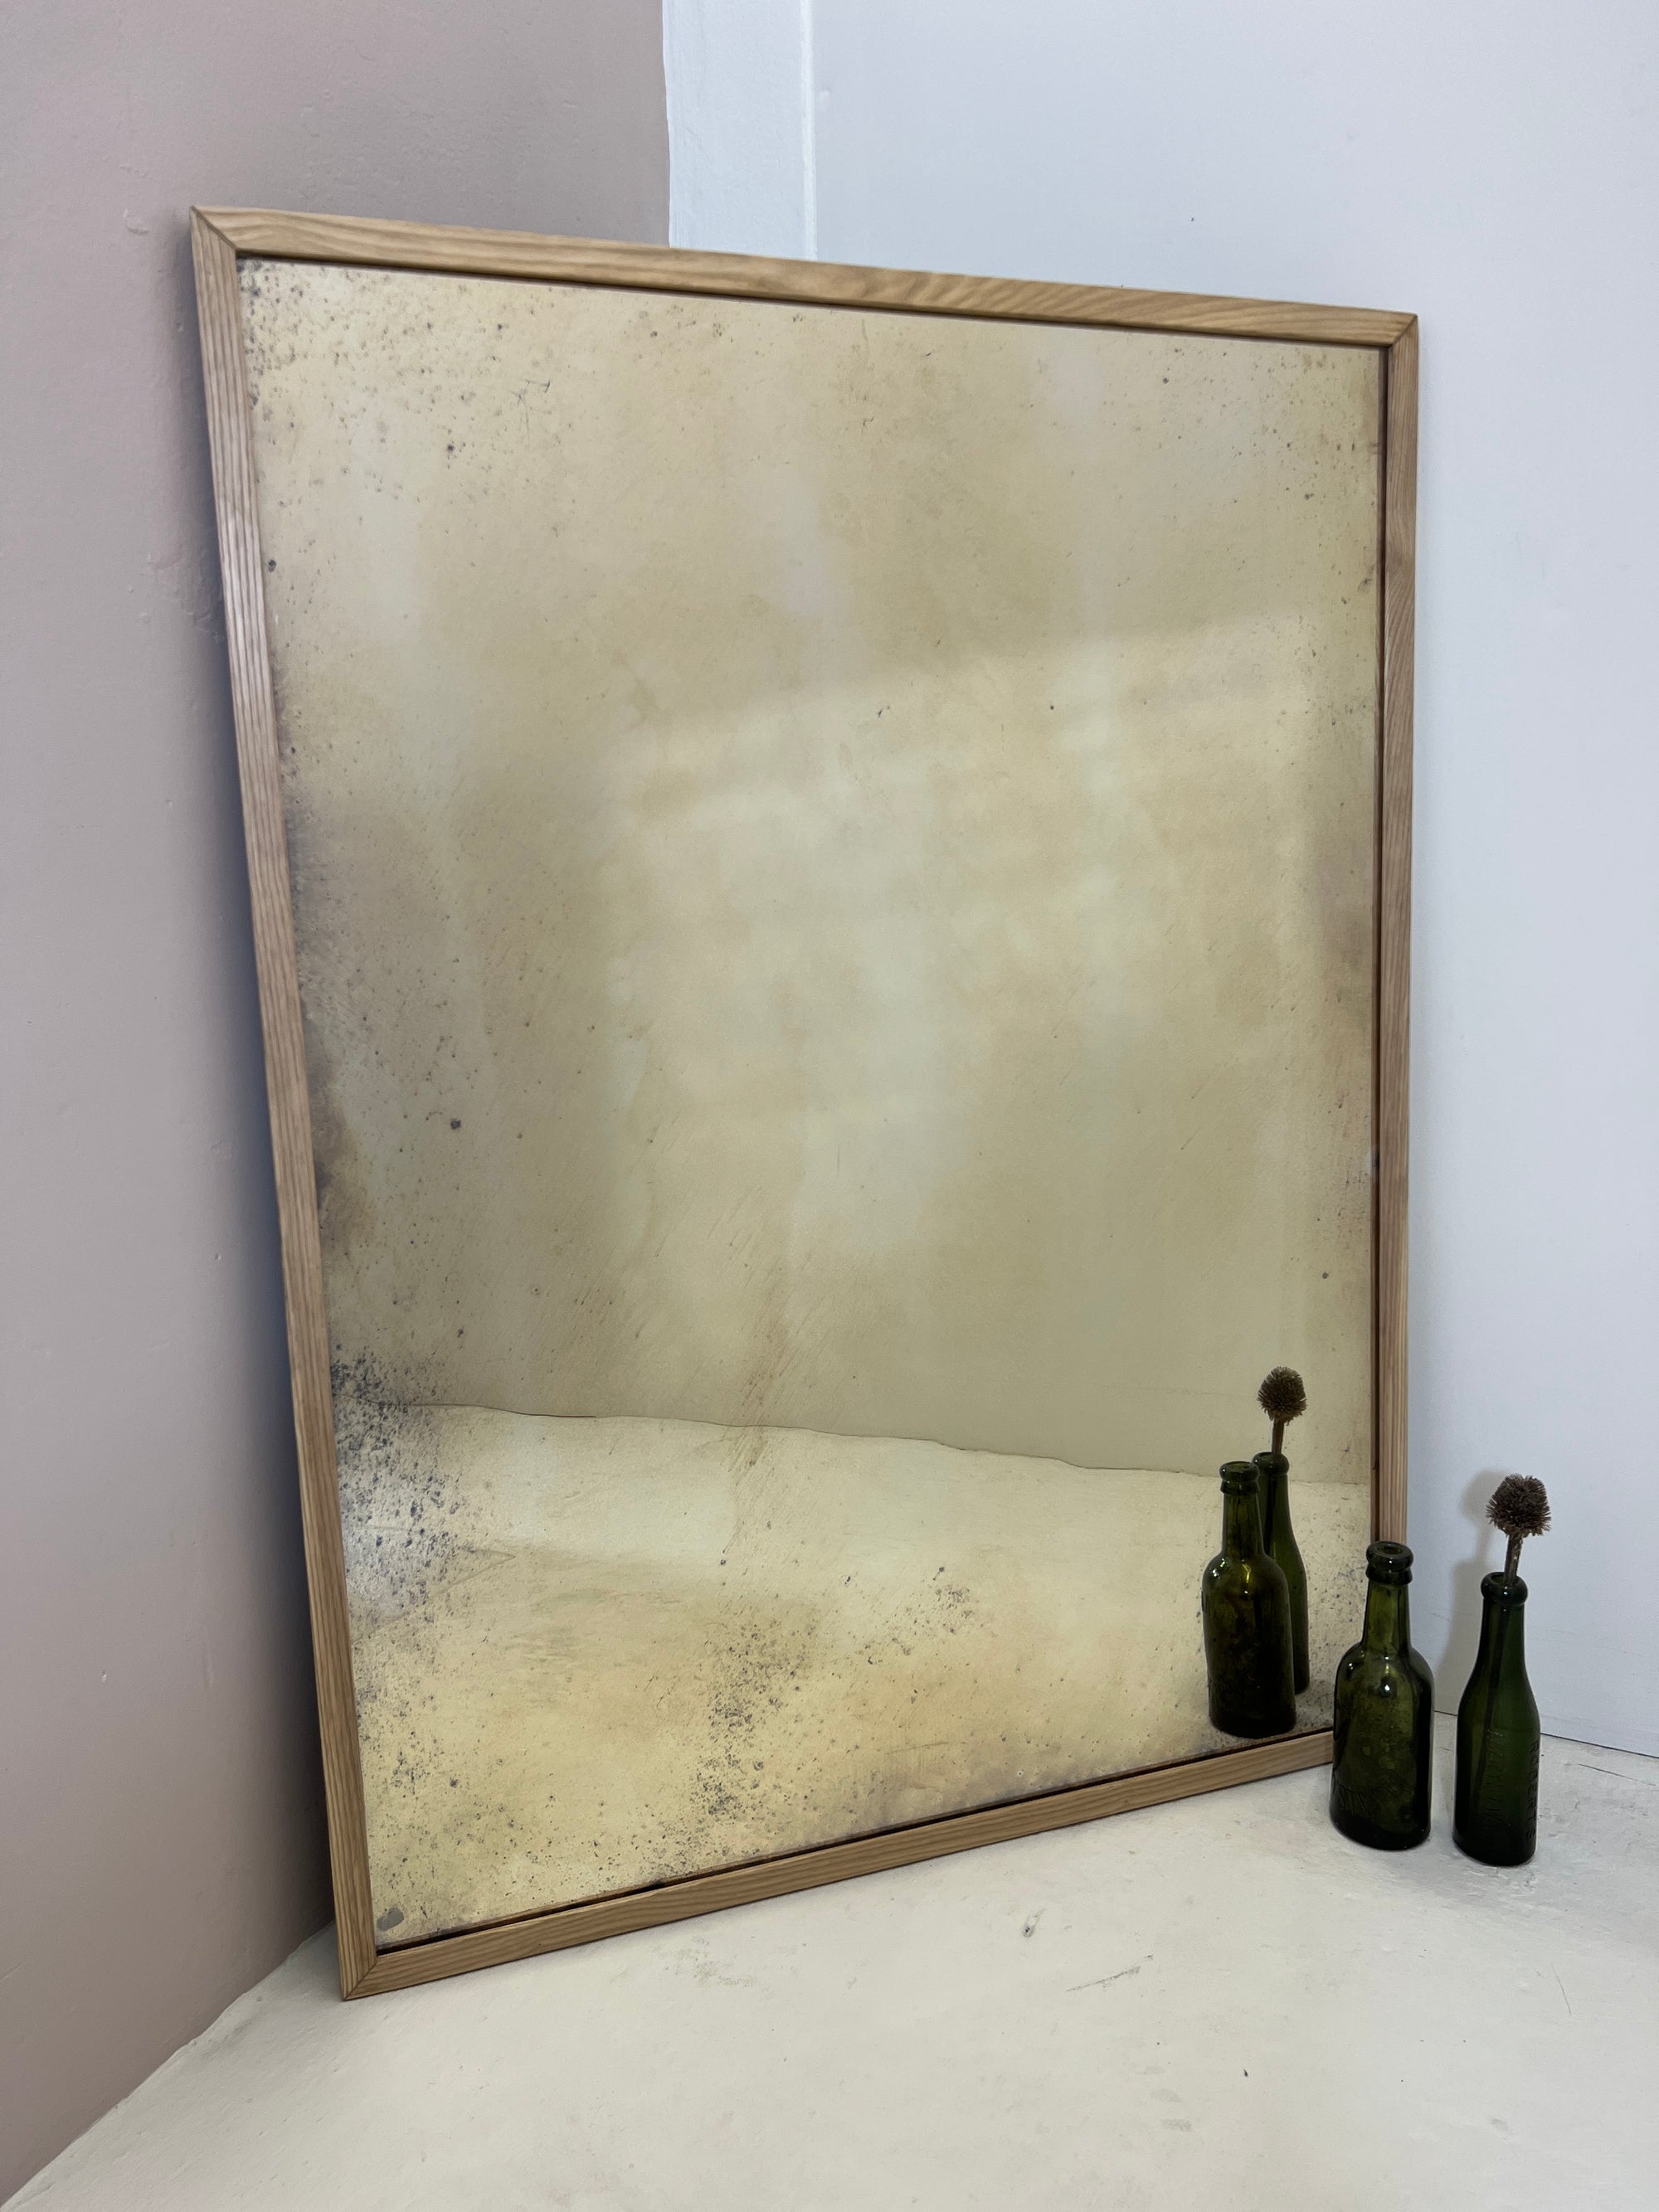 Oak Framed Antiqued Mirror with wobble glass - 770mm x 1020mm